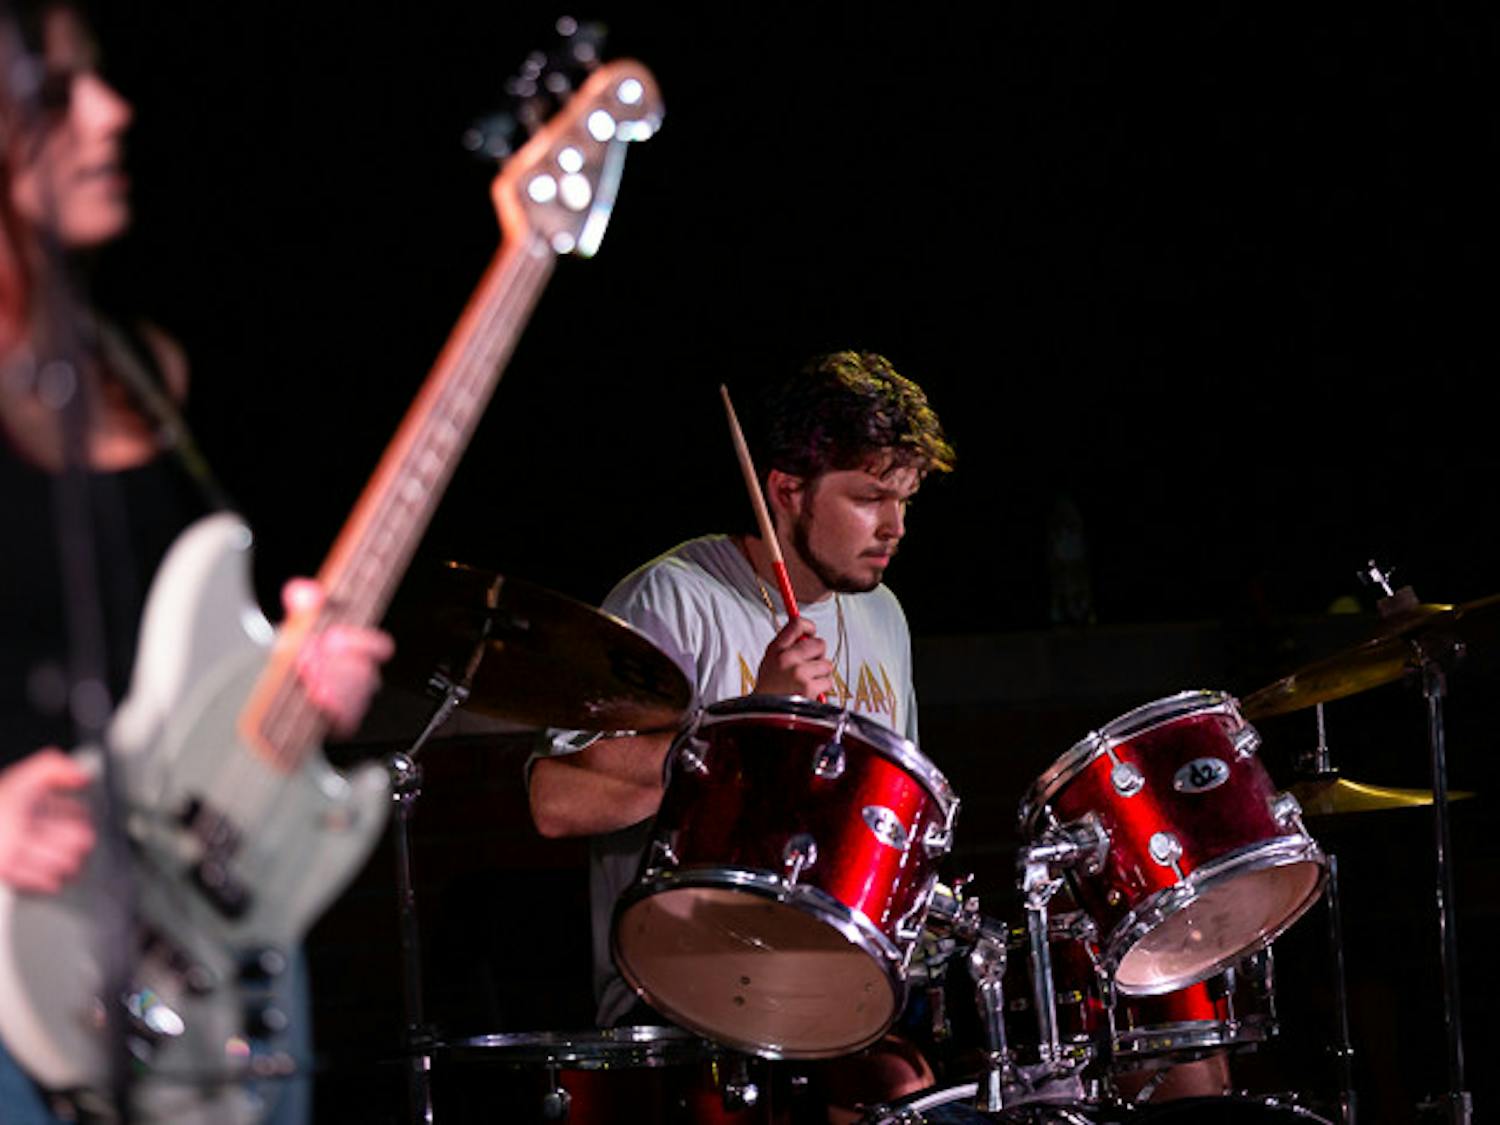 The House Band's bassist, fourth-year mathematics student Madison Adams (left), and drummer, second-year sport and entertainment management student Zach Lambert, perform at the Battle of the Bands on Oct. 5, 2022. The House Band won the competition and will be performing at the UofSC Homecoming block party on Oct. 5, 2022.